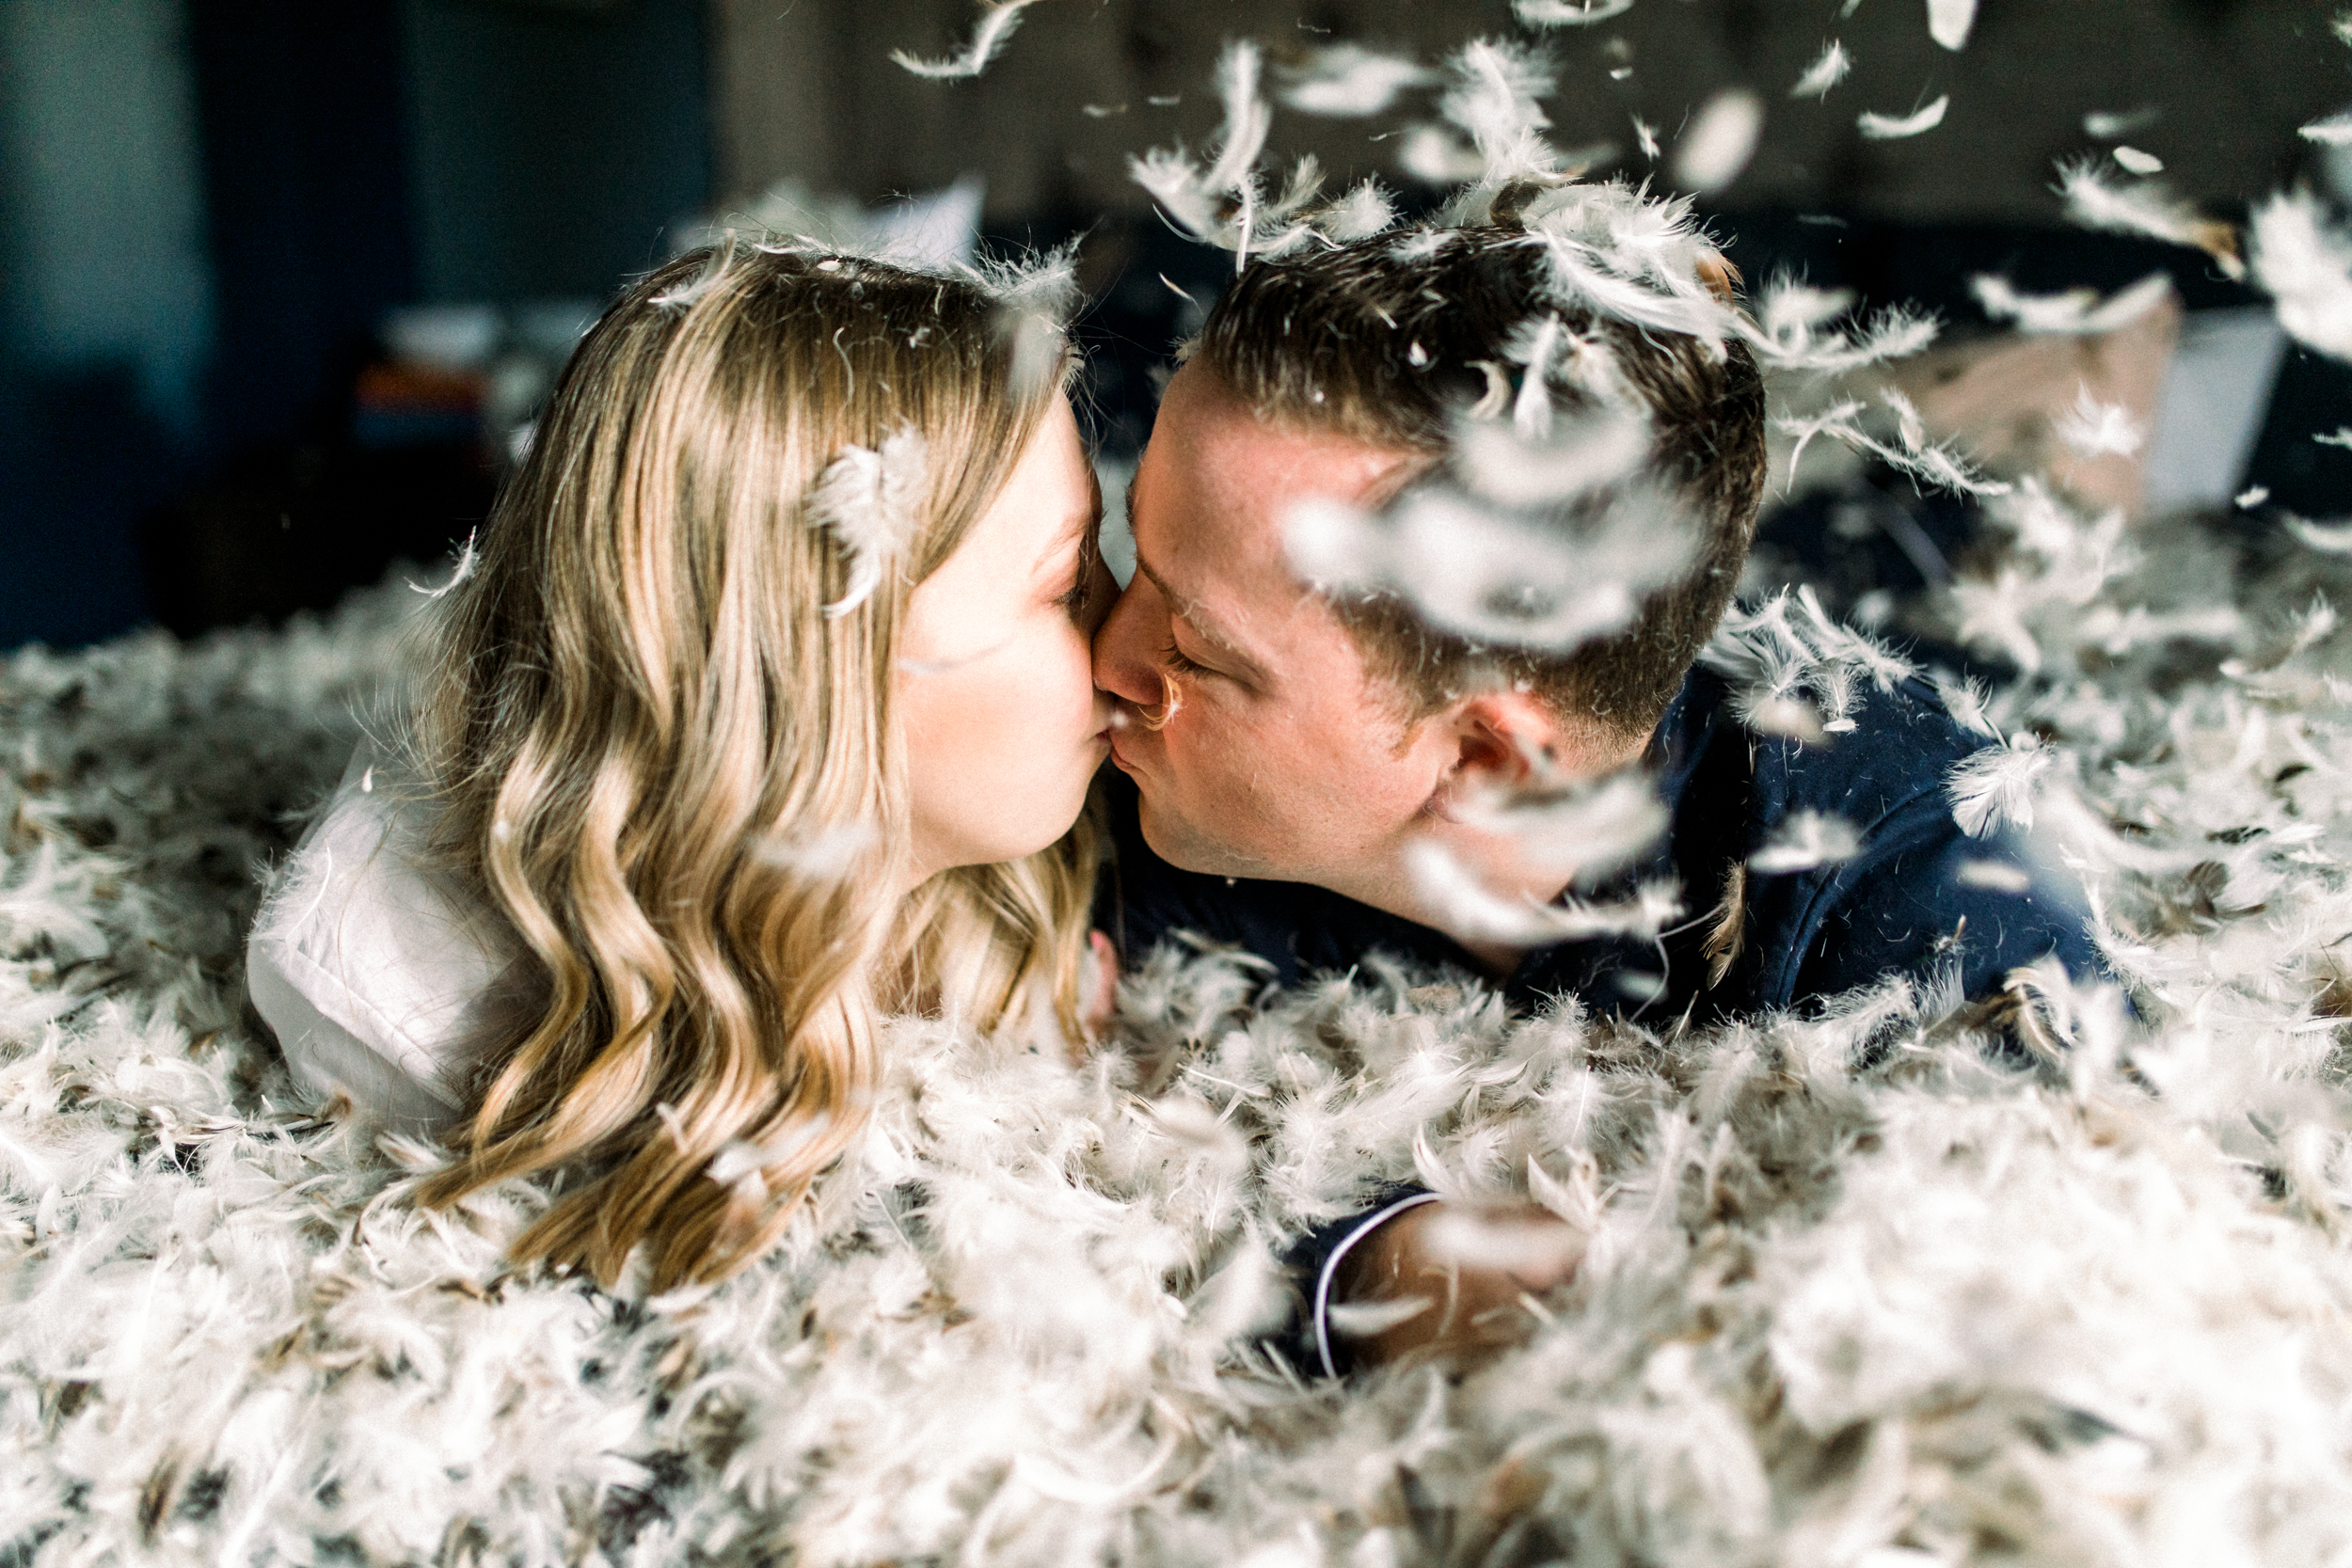 Pillow Fight Engagement Session _ Morgan Williams Photography-23.jpg